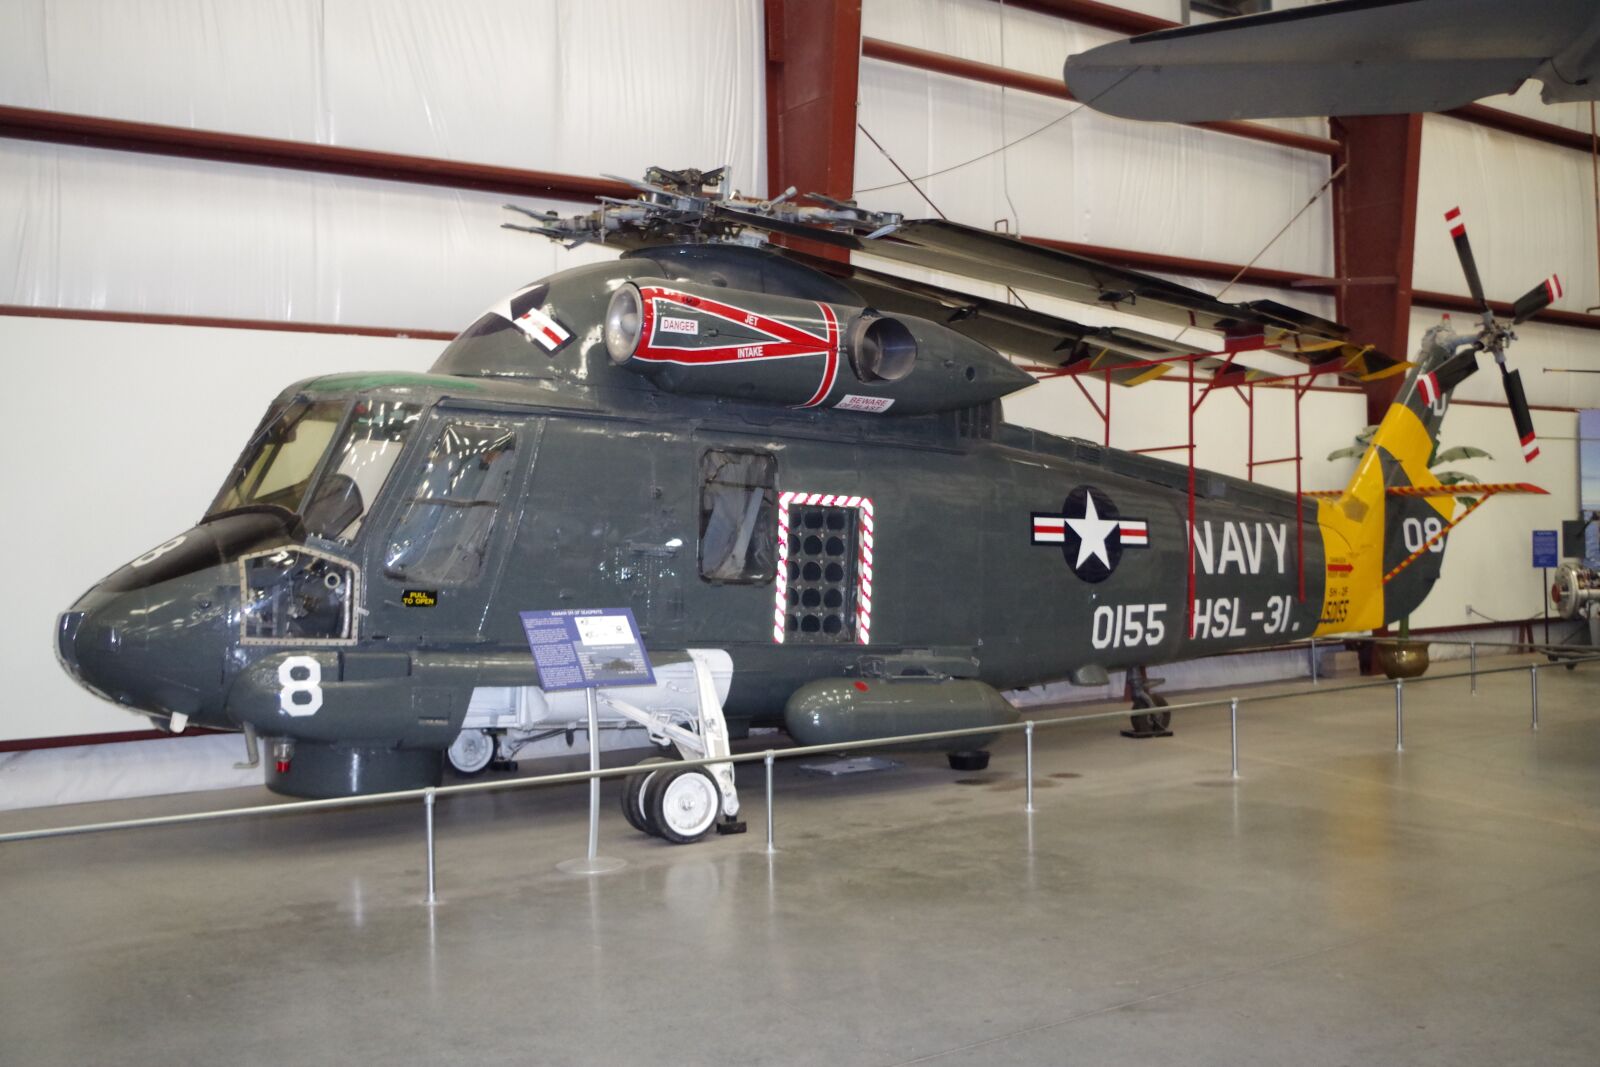 Pentax K-S1 sample photo. Helicopter, navy, museum photography